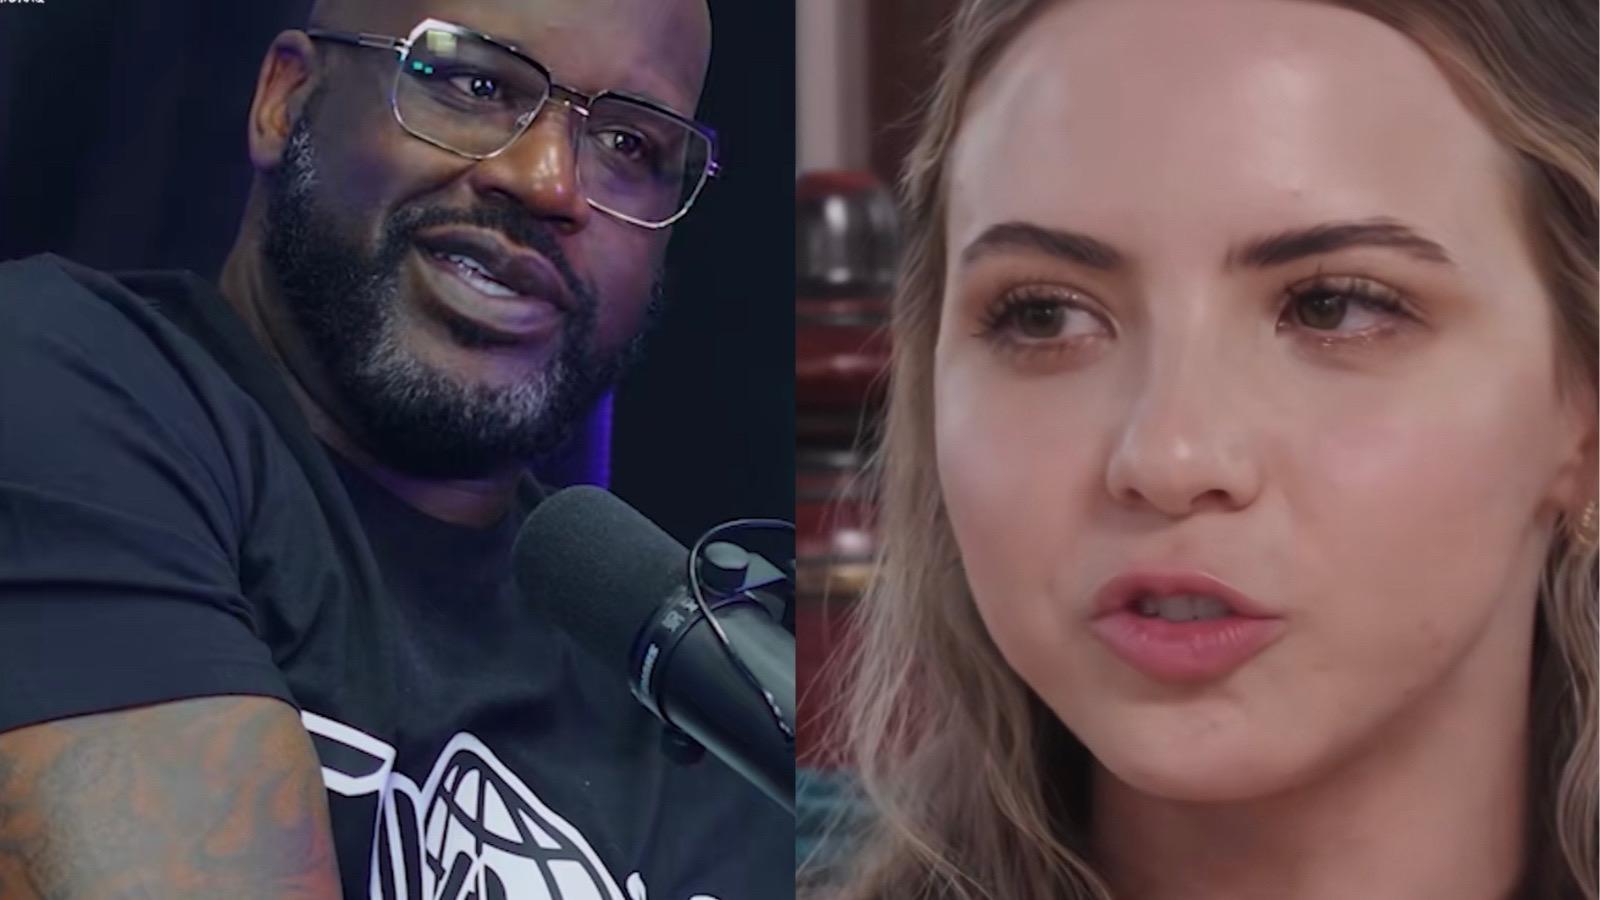 Shaq asks Bobbi Althoff on a date in front of her friend funny marco